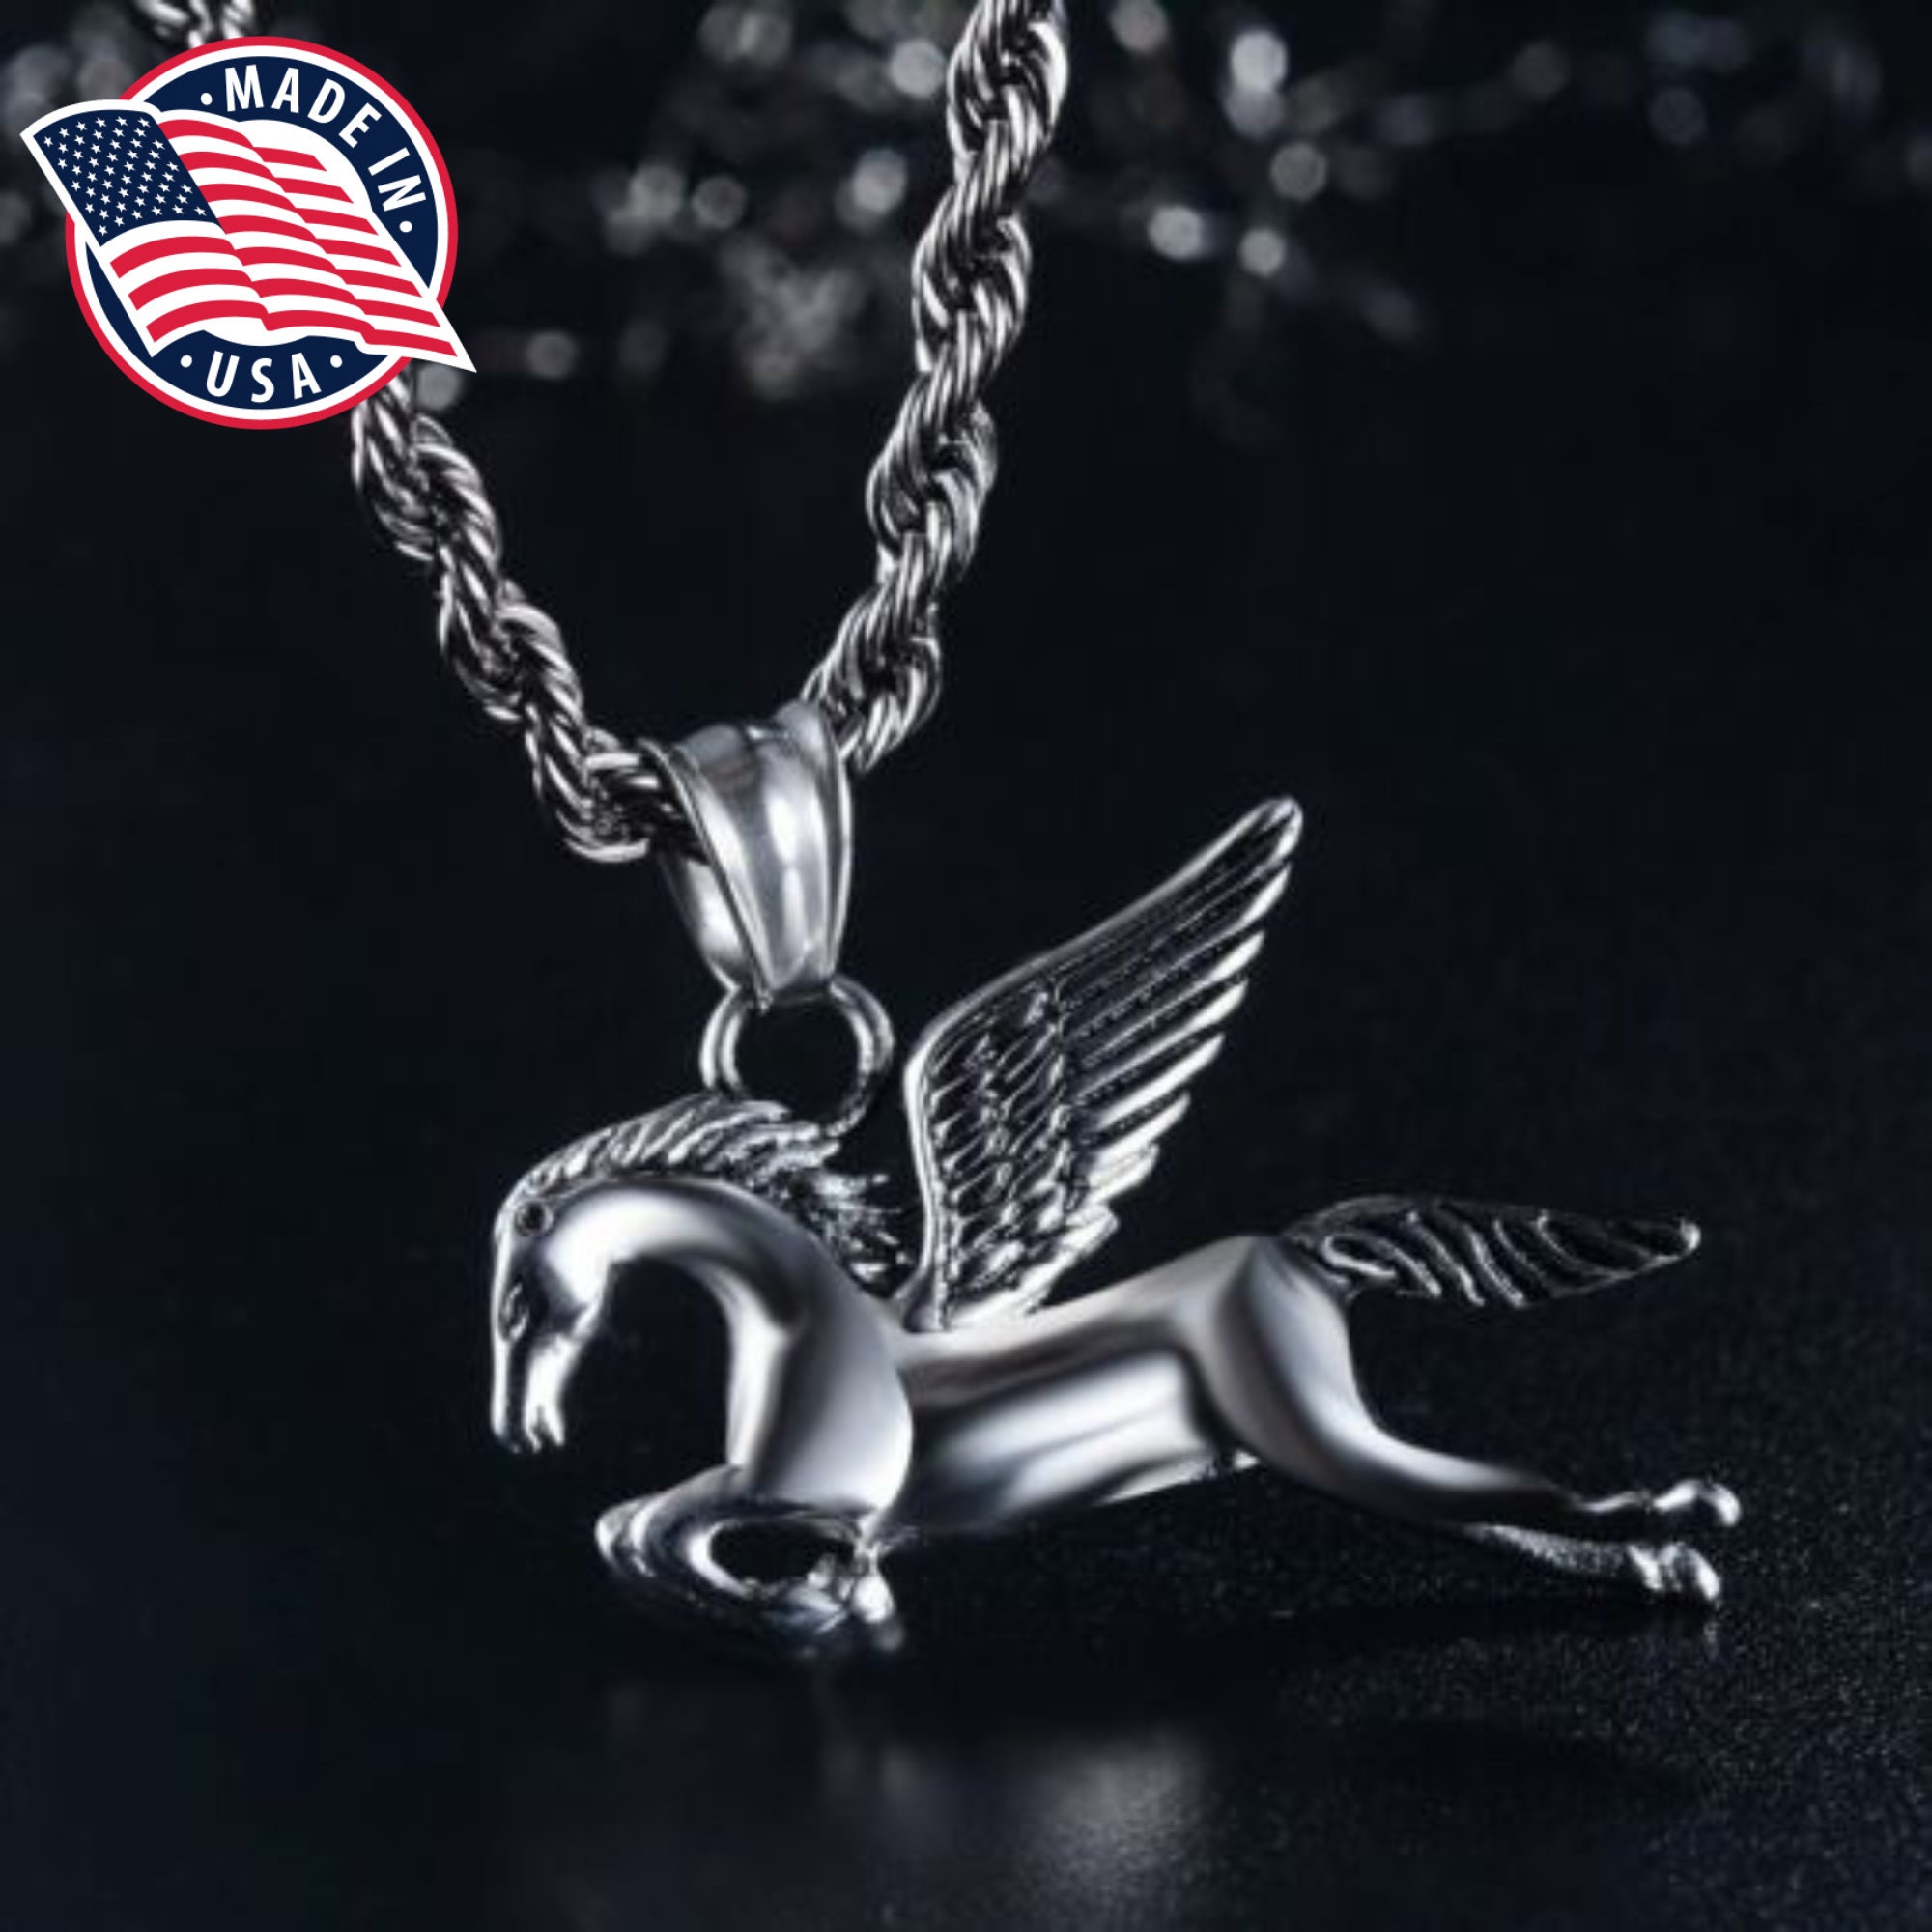 Majestic Flying Pegasus Stainless Steel Pendant Necklace | Magical Flying Pegasus Horse Pony Design Amulet Jewelry Piece